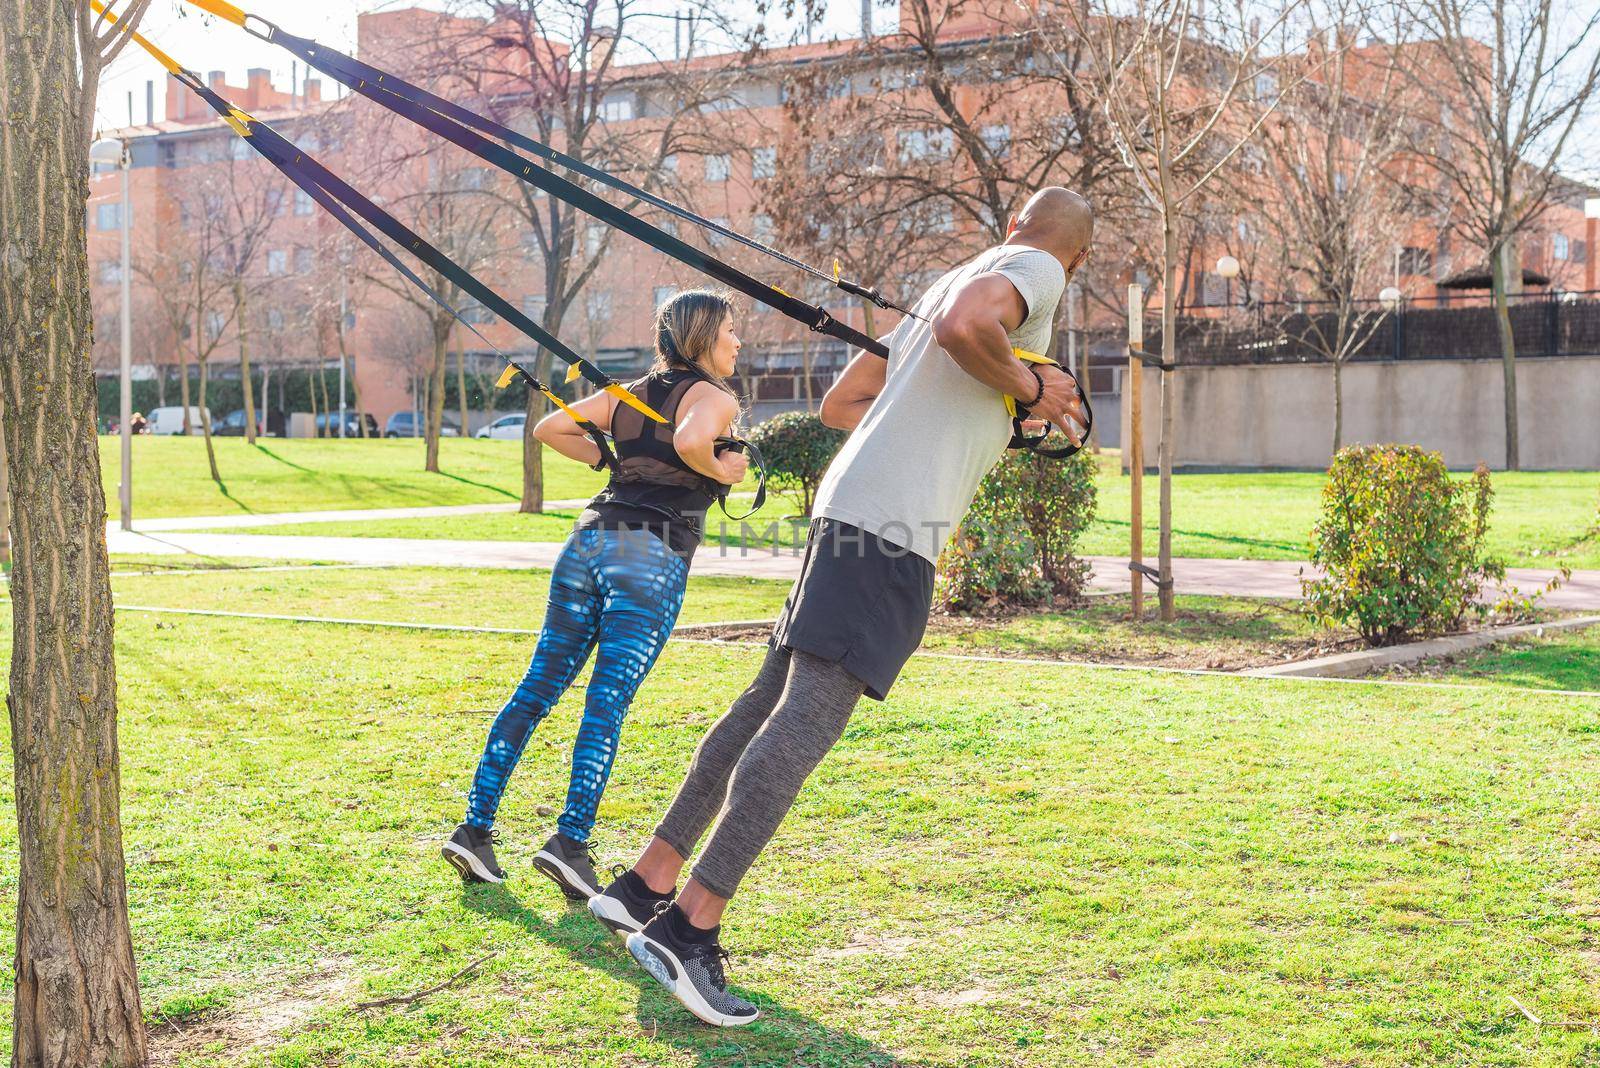 Athletic couple doing back exercise with trx fitness straps in park. Adult man and woman exercising outdoors.